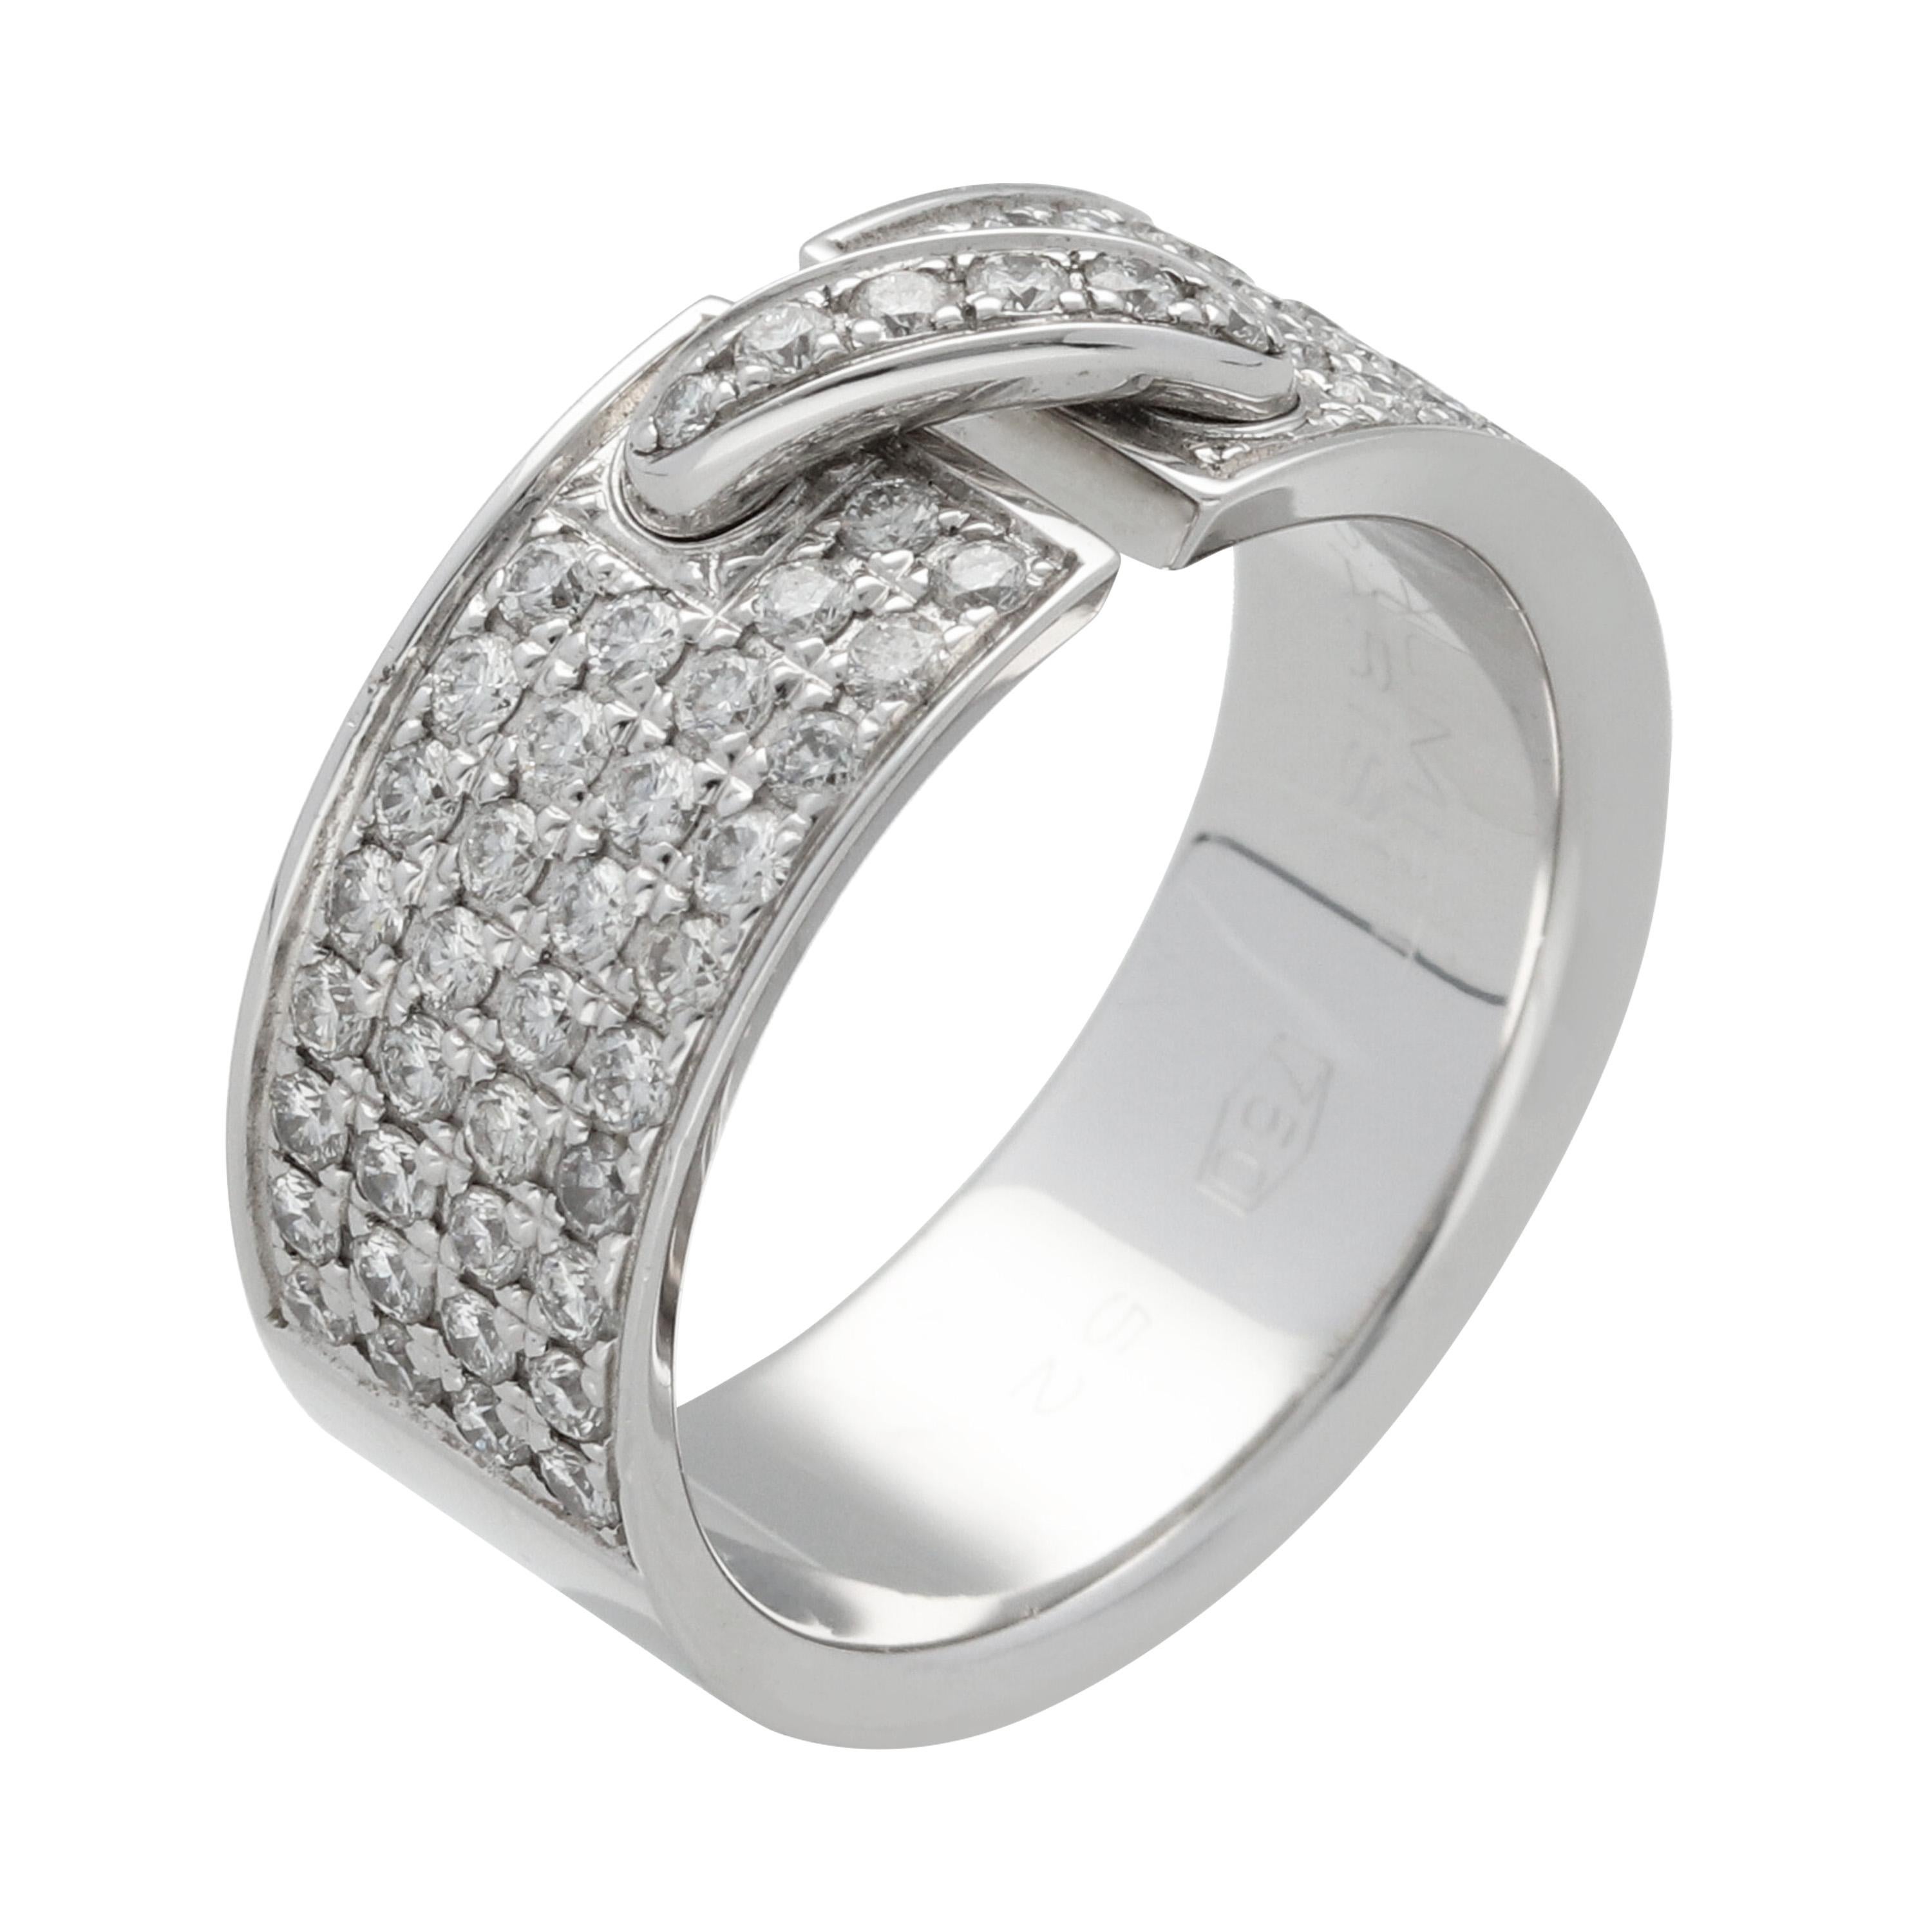 A 750 white gold Chaumet  'Liens' simple model ring, set with a pavé of brilliant cut diamonds. 

The Liens collection celebrates the link between two people, through a contemporary reinterpretation of sentimental jewellery. The link is highly